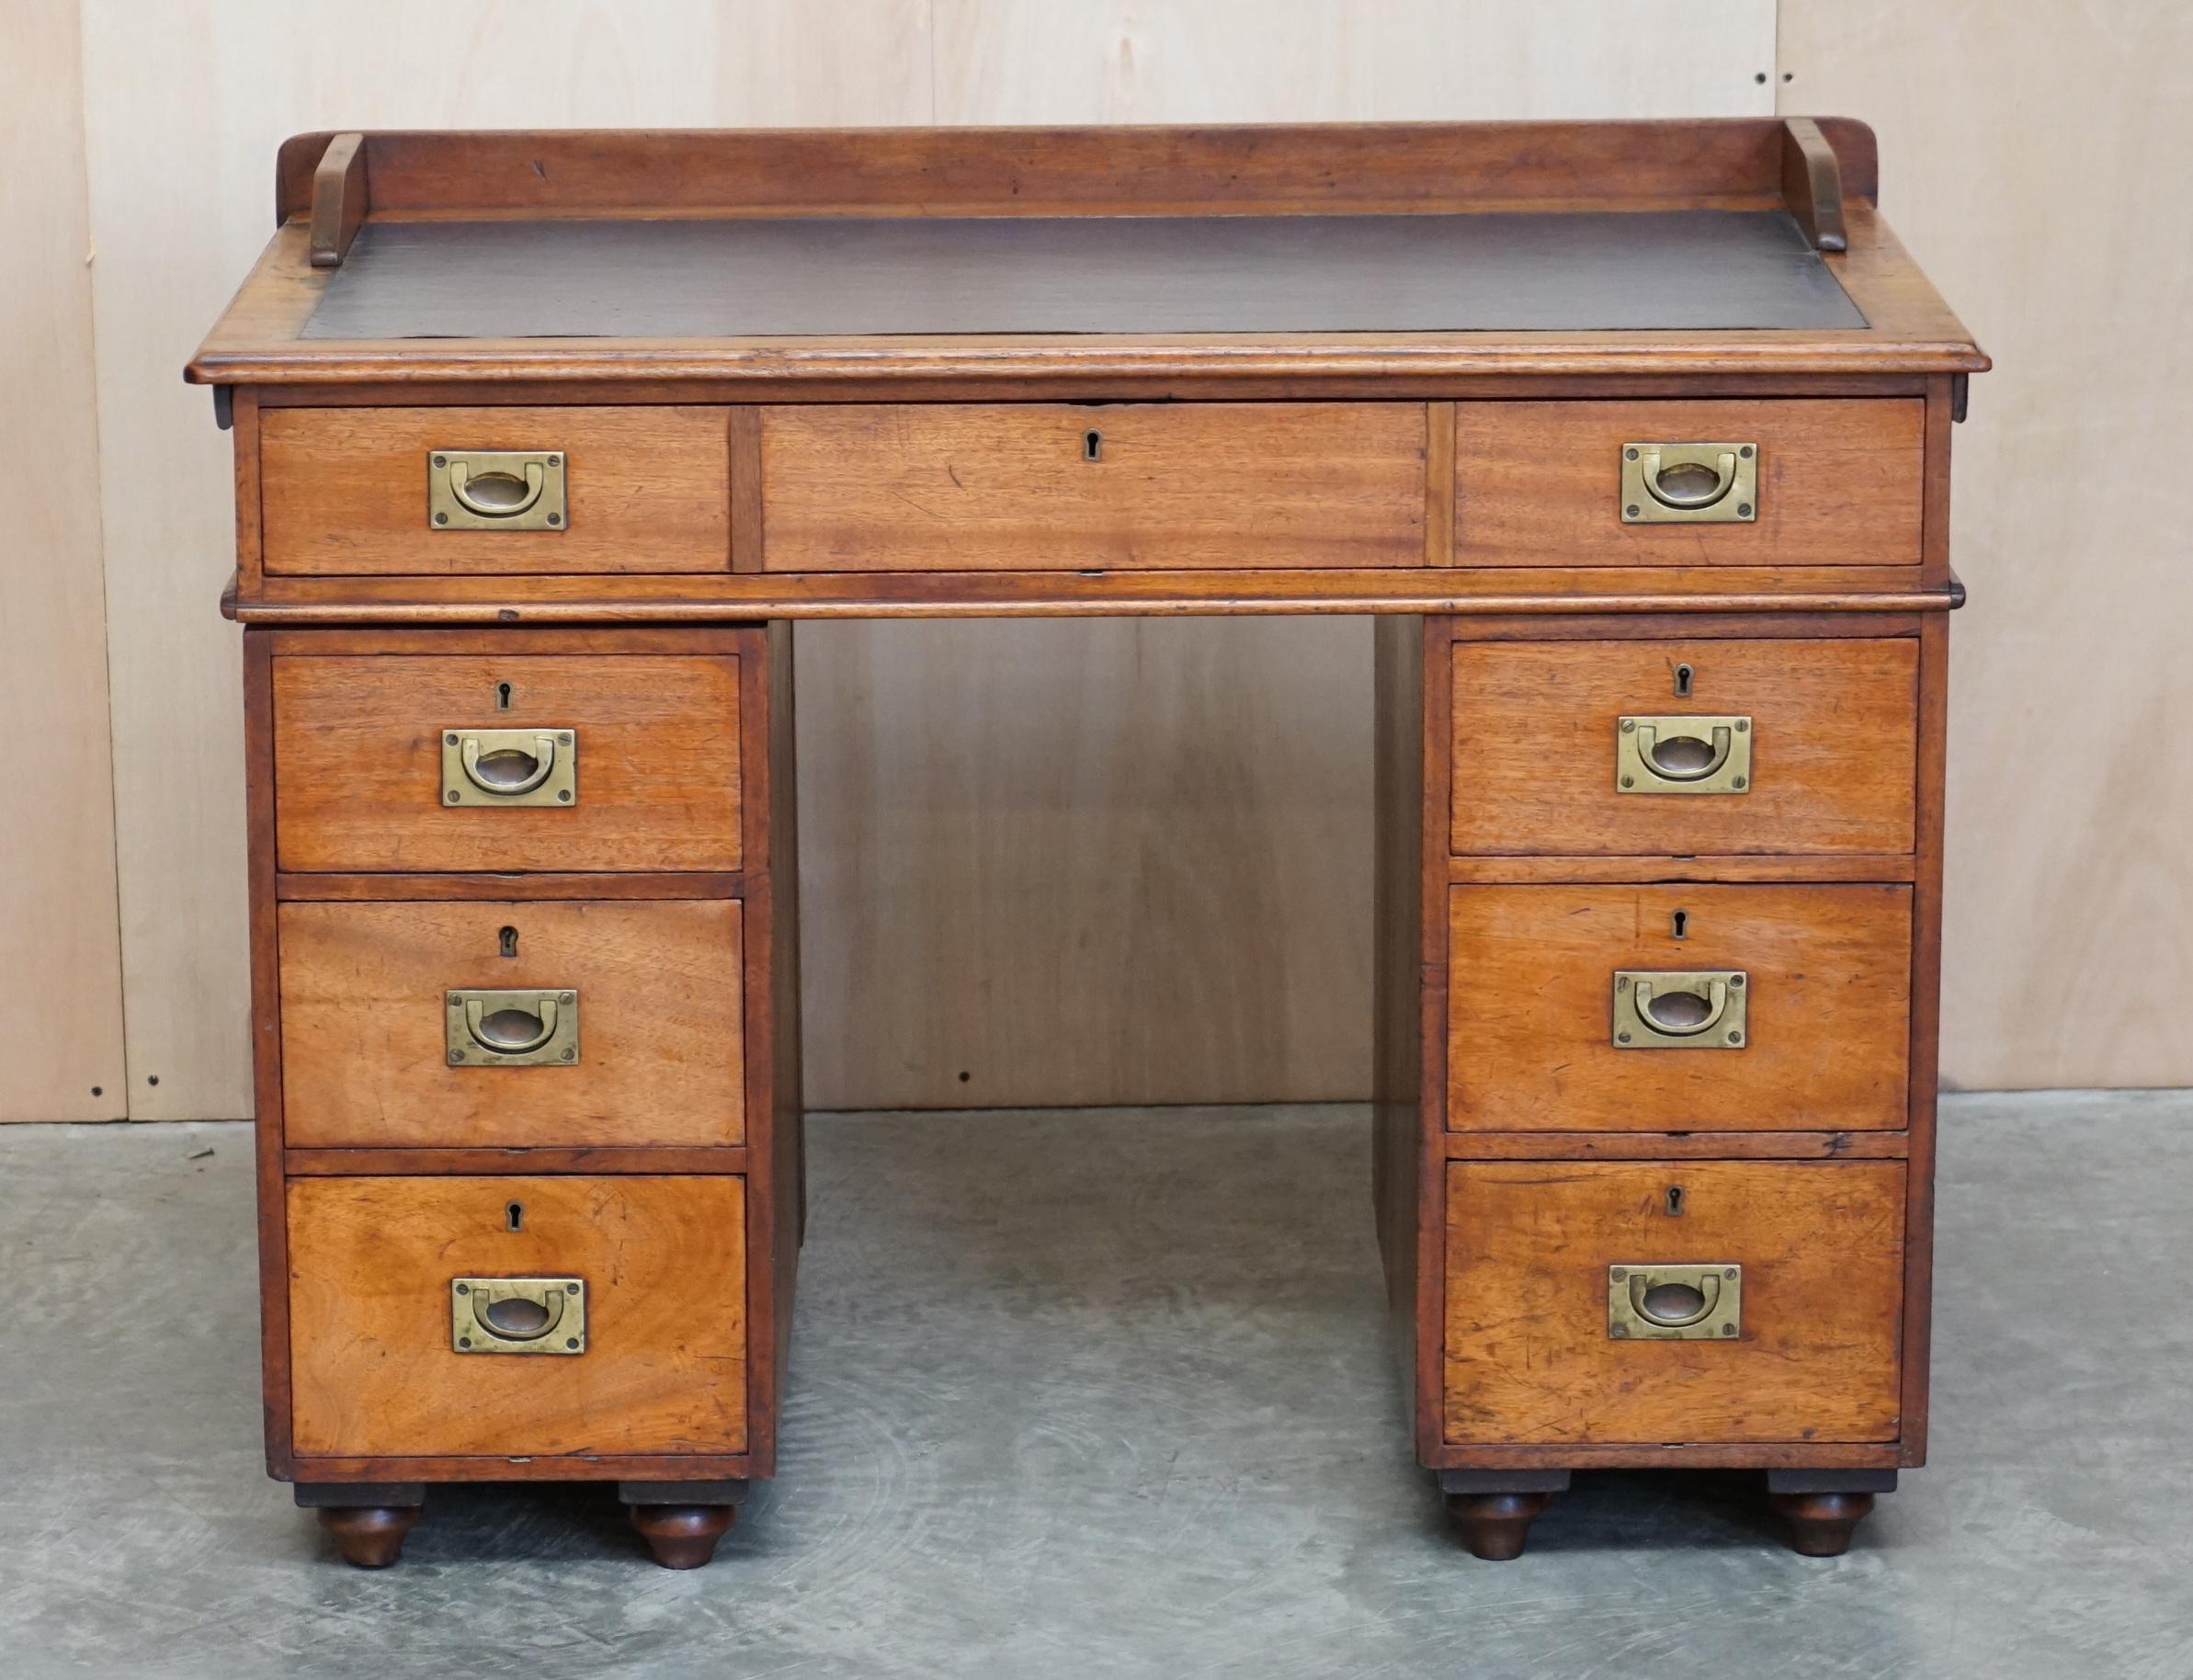 We are delighted to offer this very rare original Naval Military Campaign officers desk

This is a naval military desk, the top slots into little grooves at the back of each pedestal. The top drawer which looks to be three separate drawers is